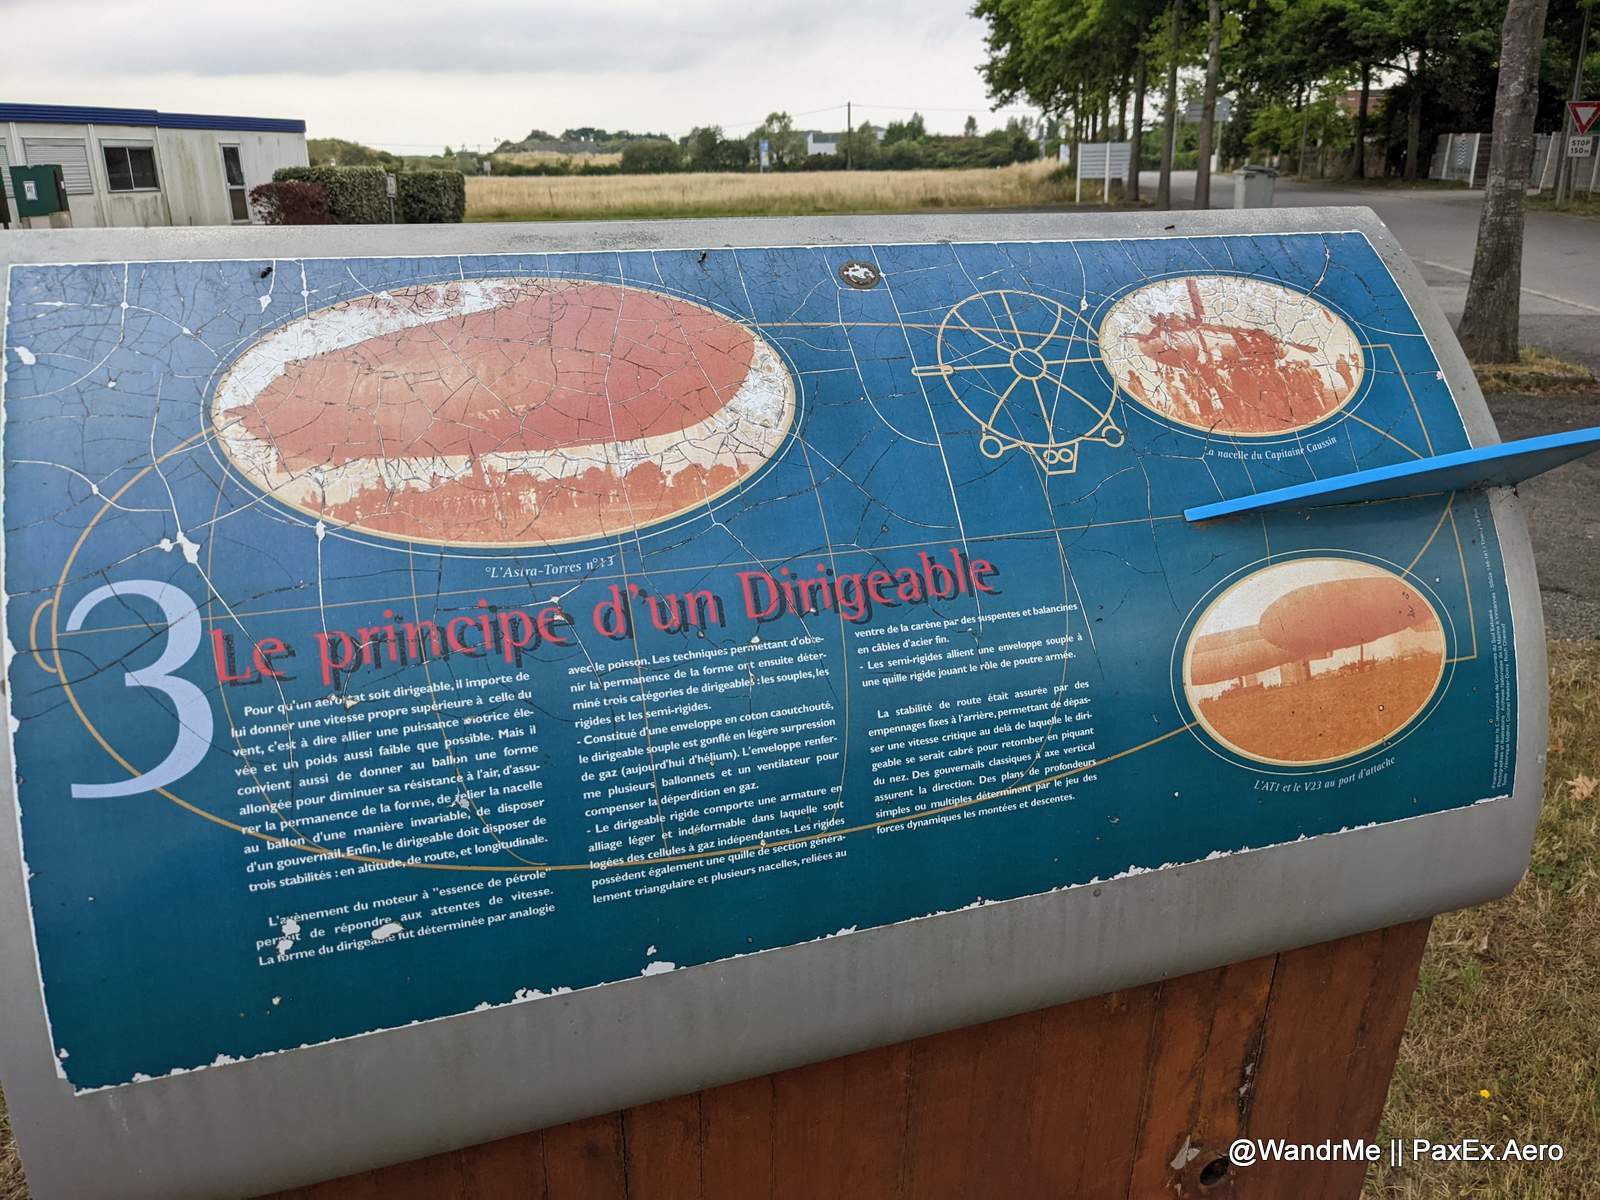 One of the displays of airship technology at the World War I memorial in St Viaud, France